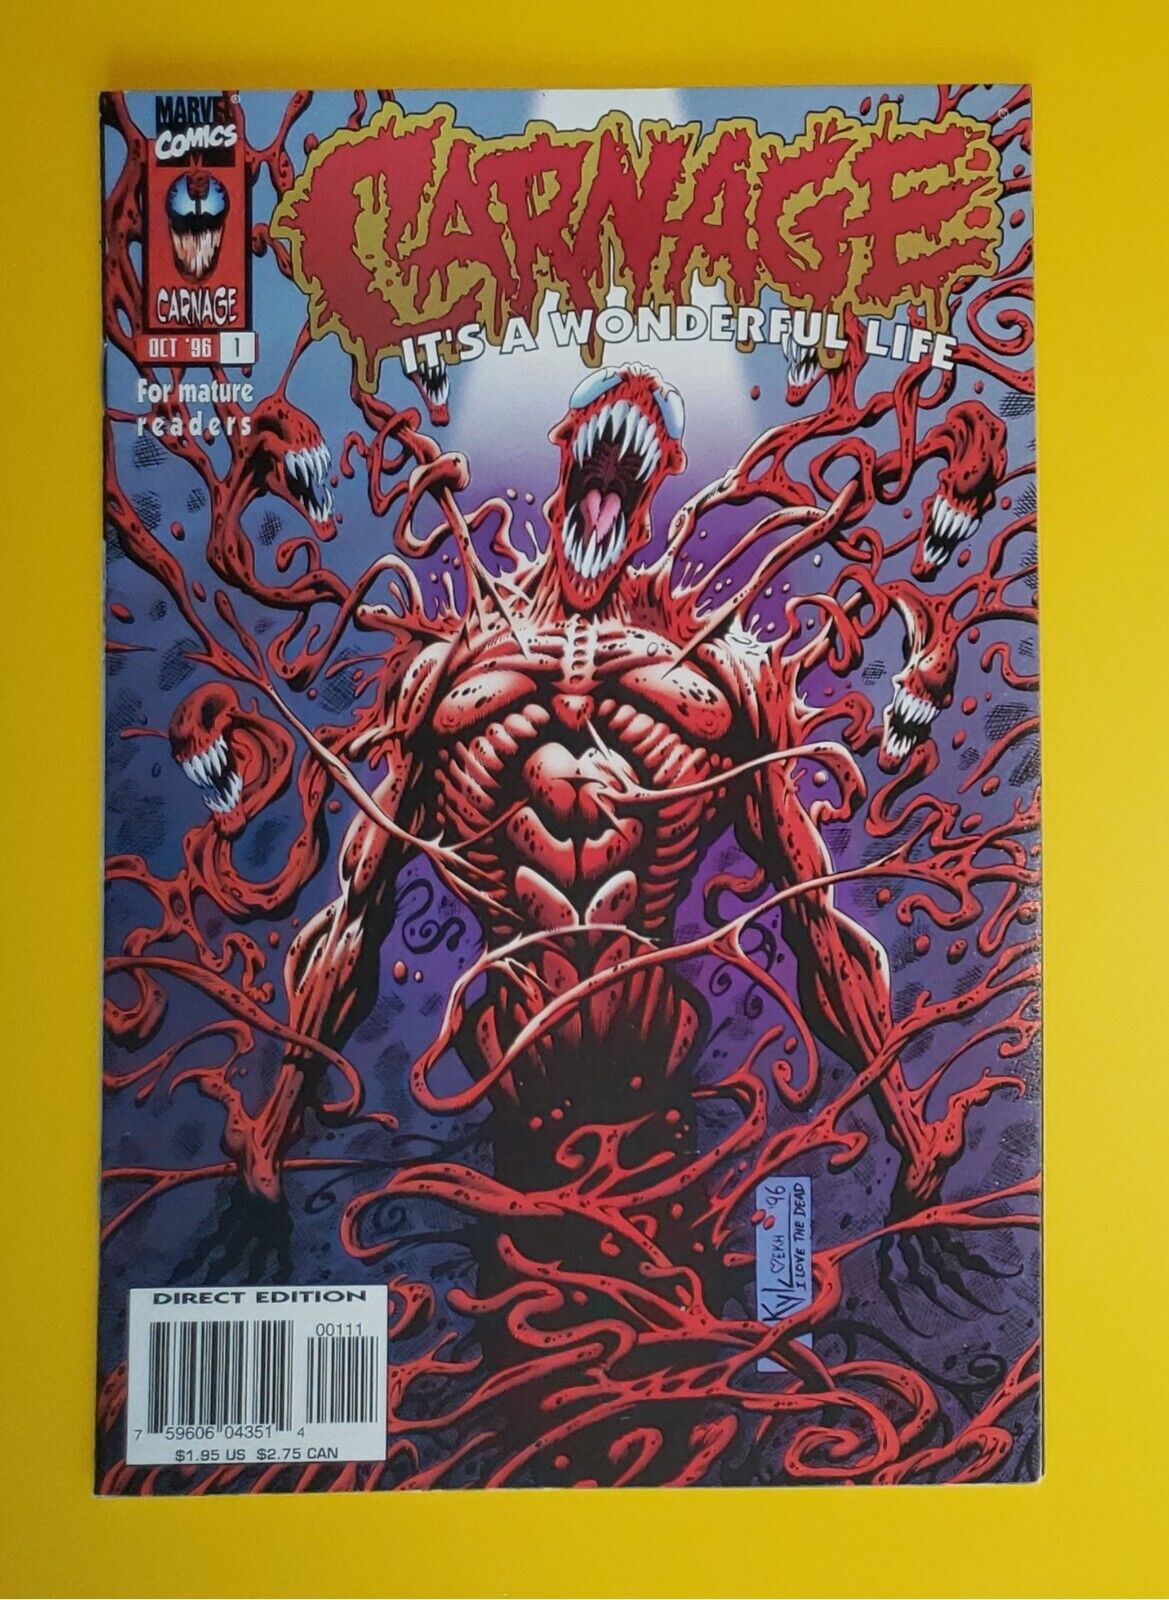 CARNAGE IT'S A WONDERFUL LIFE #1 (1996) NM Marvel Comics Direct Edition VF/NM